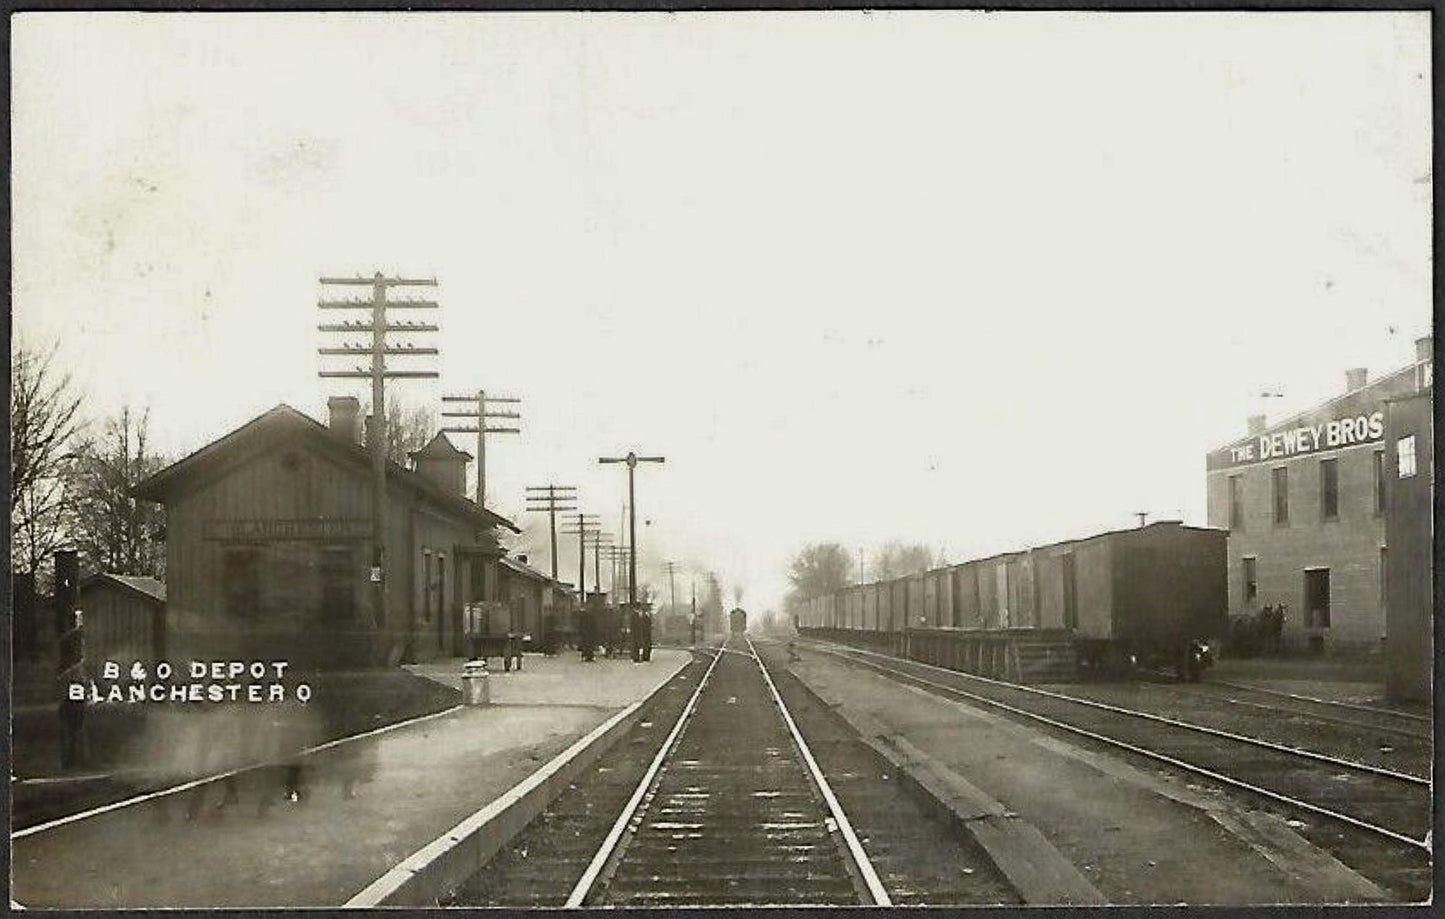 1910. B&O Railroad Depot and Dewy Brothers at Blanchester.